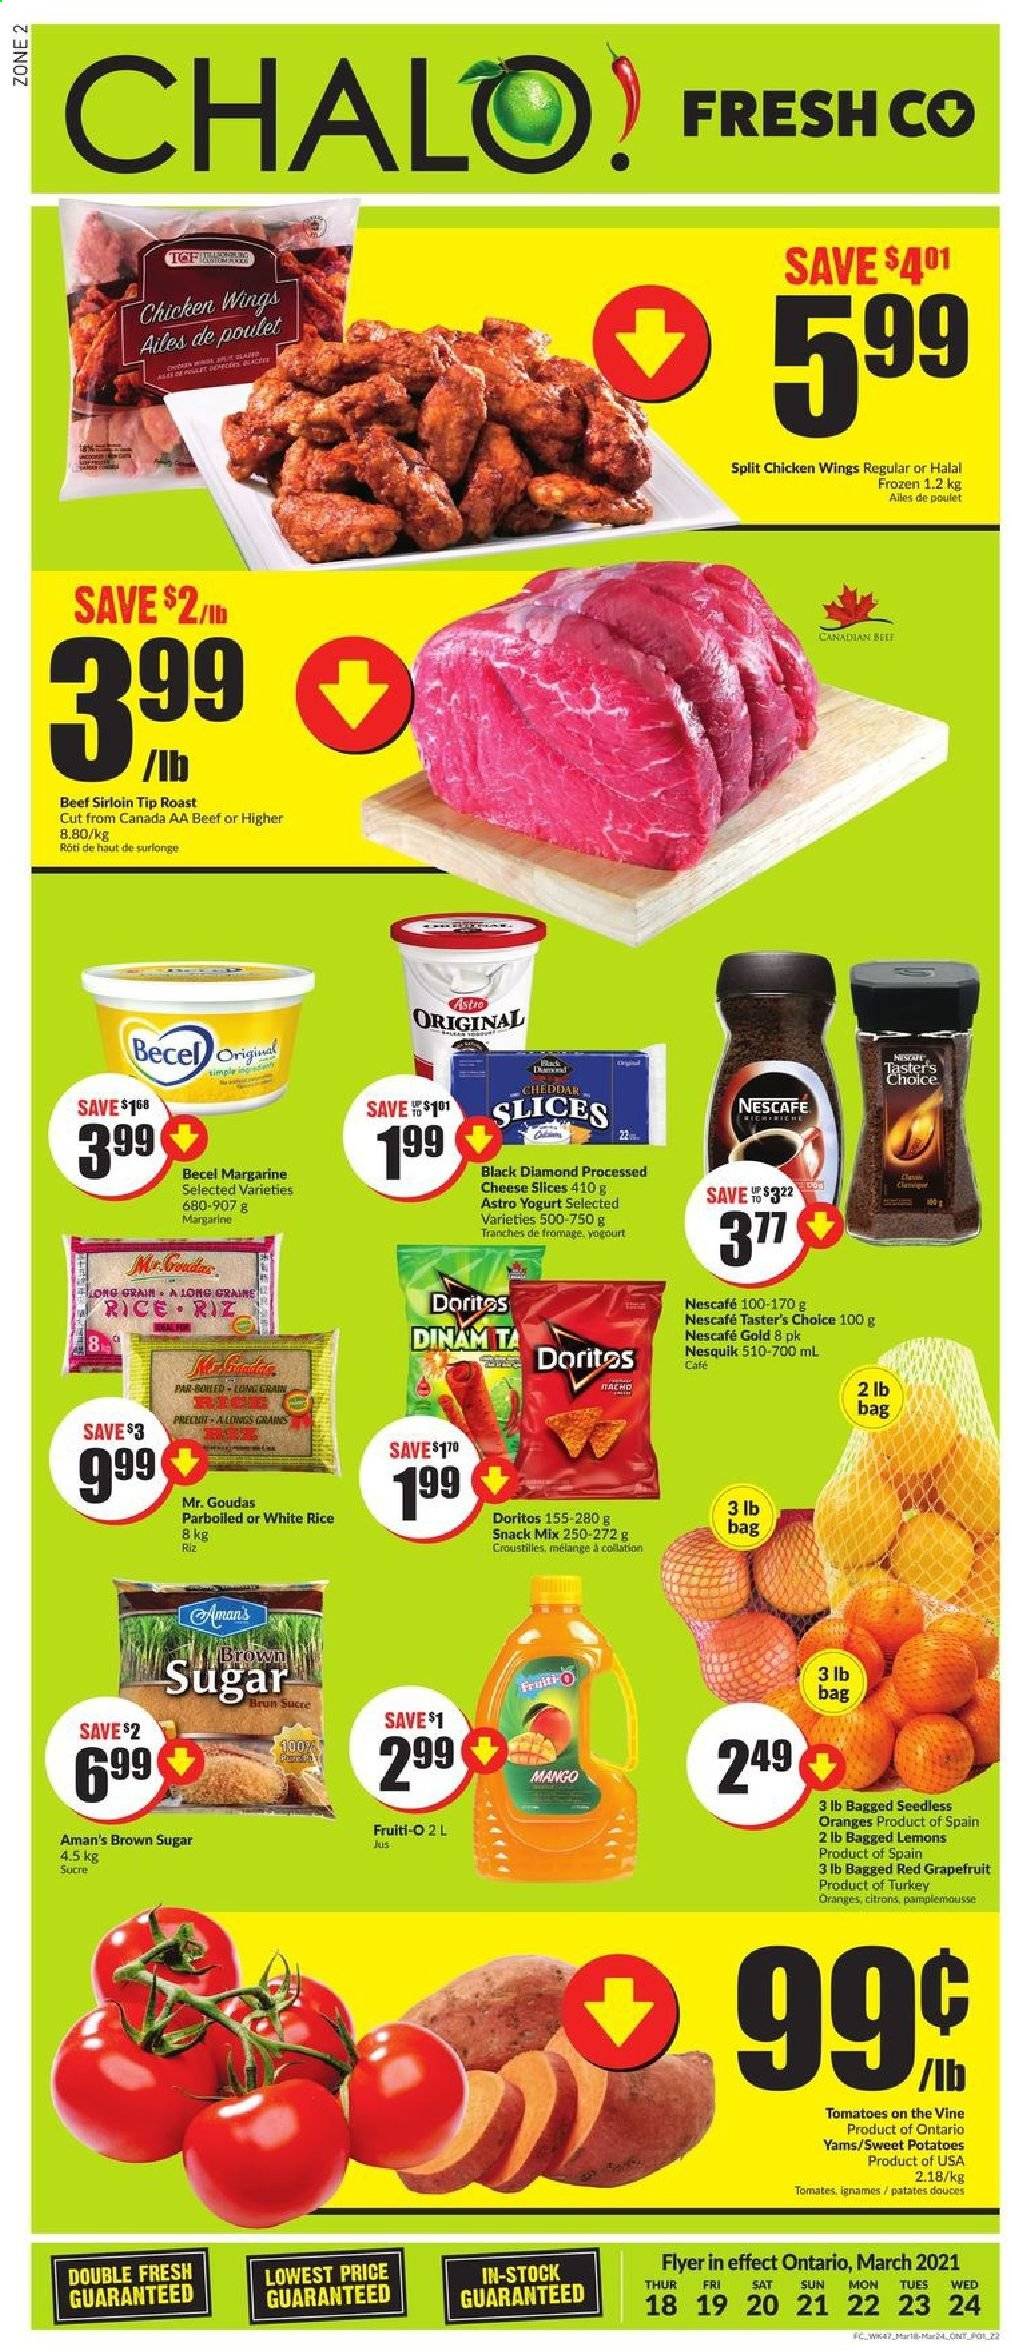 thumbnail - Chalo! FreshCo. Flyer - March 18, 2021 - March 24, 2021 - Sales products - sweet potato, tomatoes, potatoes, grapefruits, mango, lemons, sliced cheese, cheddar, cheese, yoghurt, margarine, chicken wings, snack, Doritos, cane sugar, rice, white rice, beef meat, beef sirloin, Nesquik, Nescafé. Page 1.